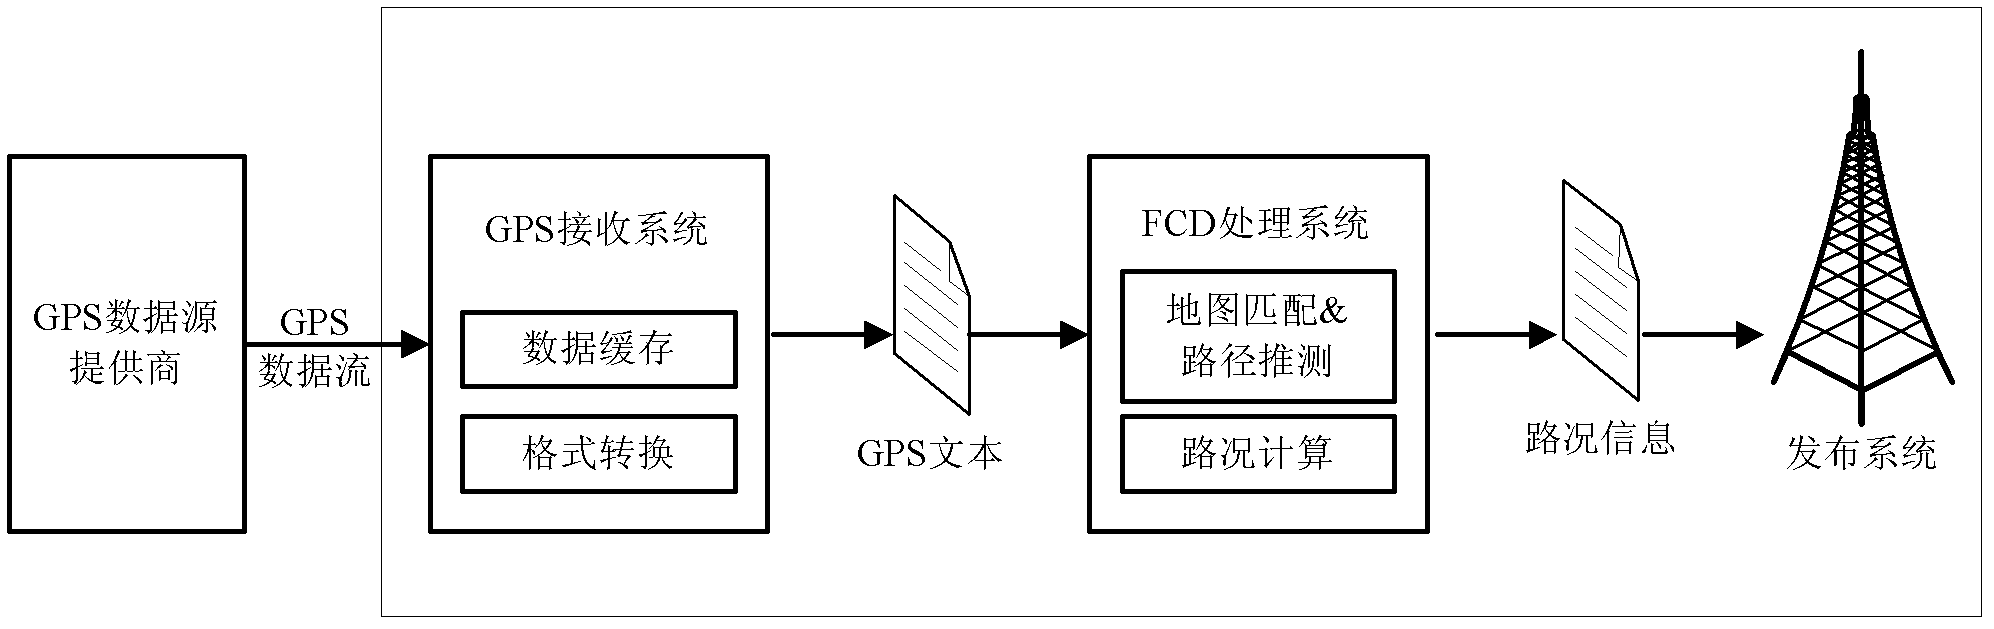 Method for generating real-time traffic information